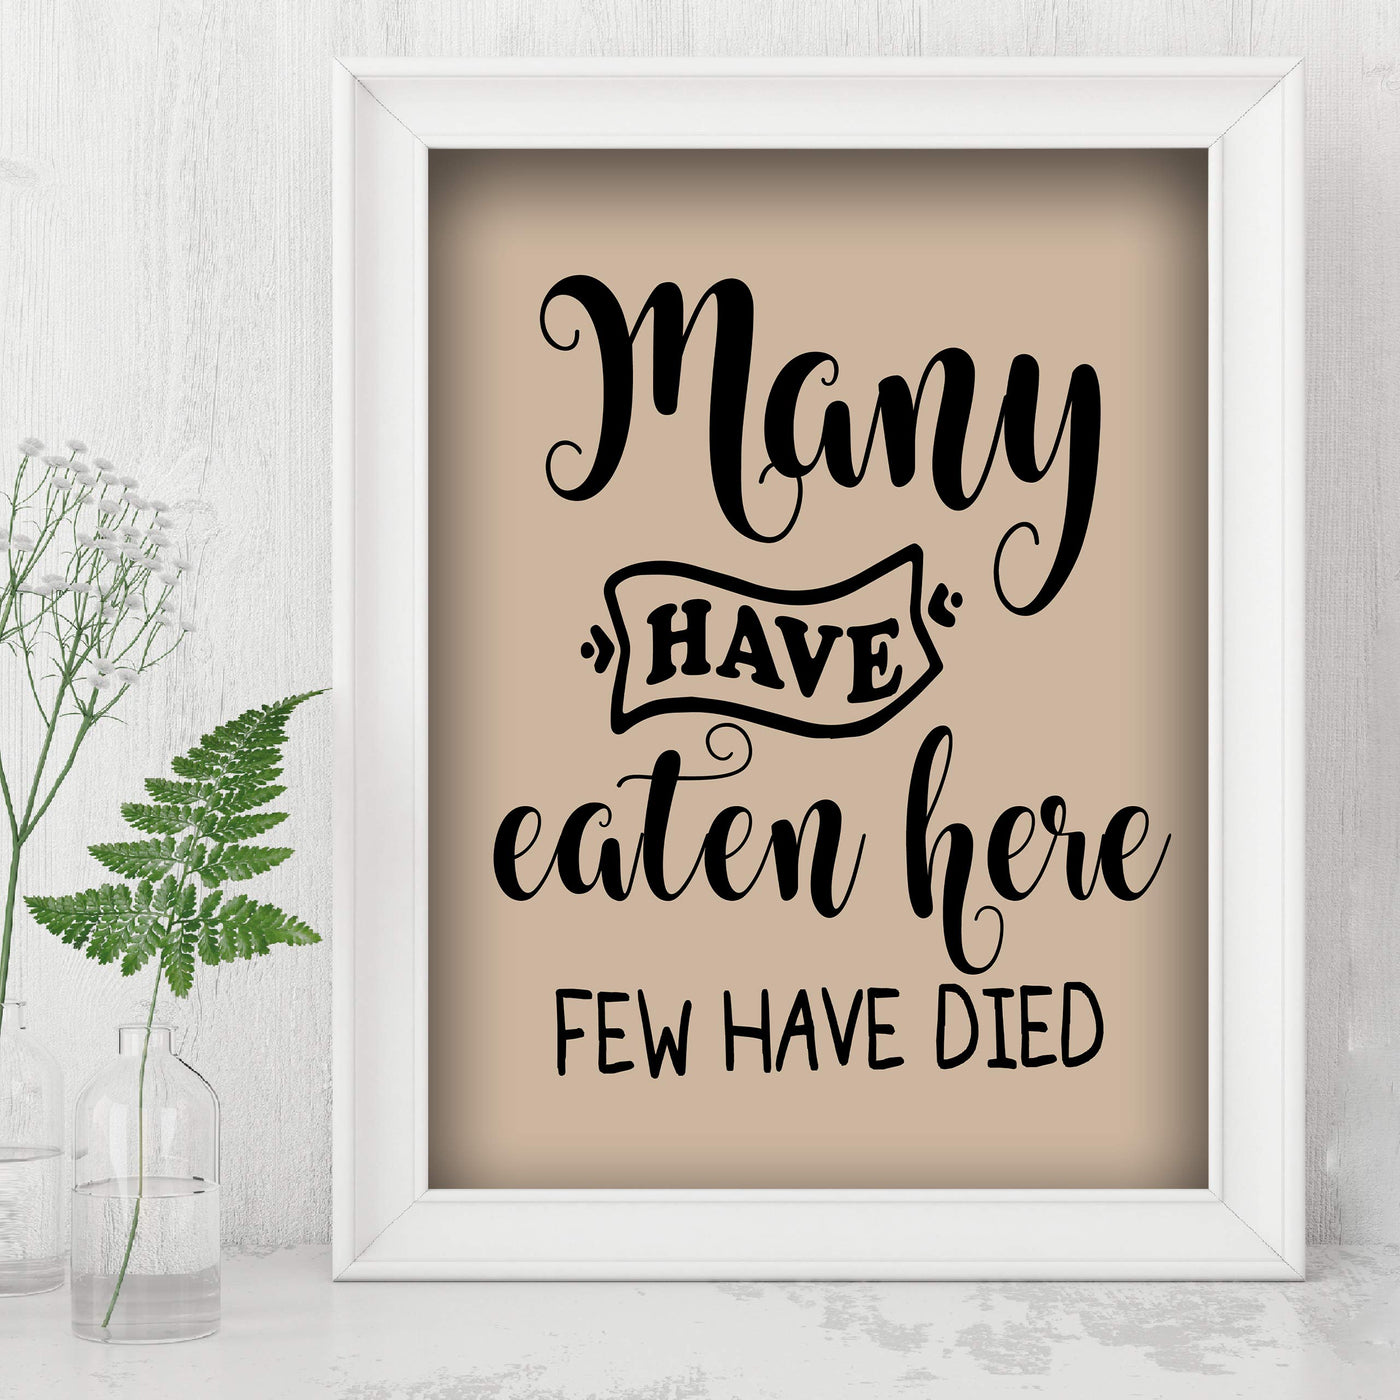 Many Have Eaten Here-Few Have Died Funny Wall Sign- 8 x 10" Typographic Wall Art Print-Ready to Frame. Humorous Home-Office-Bar-Man Cave Decor. Perfect Kitchen Sign! Great Novelty Gift for All!